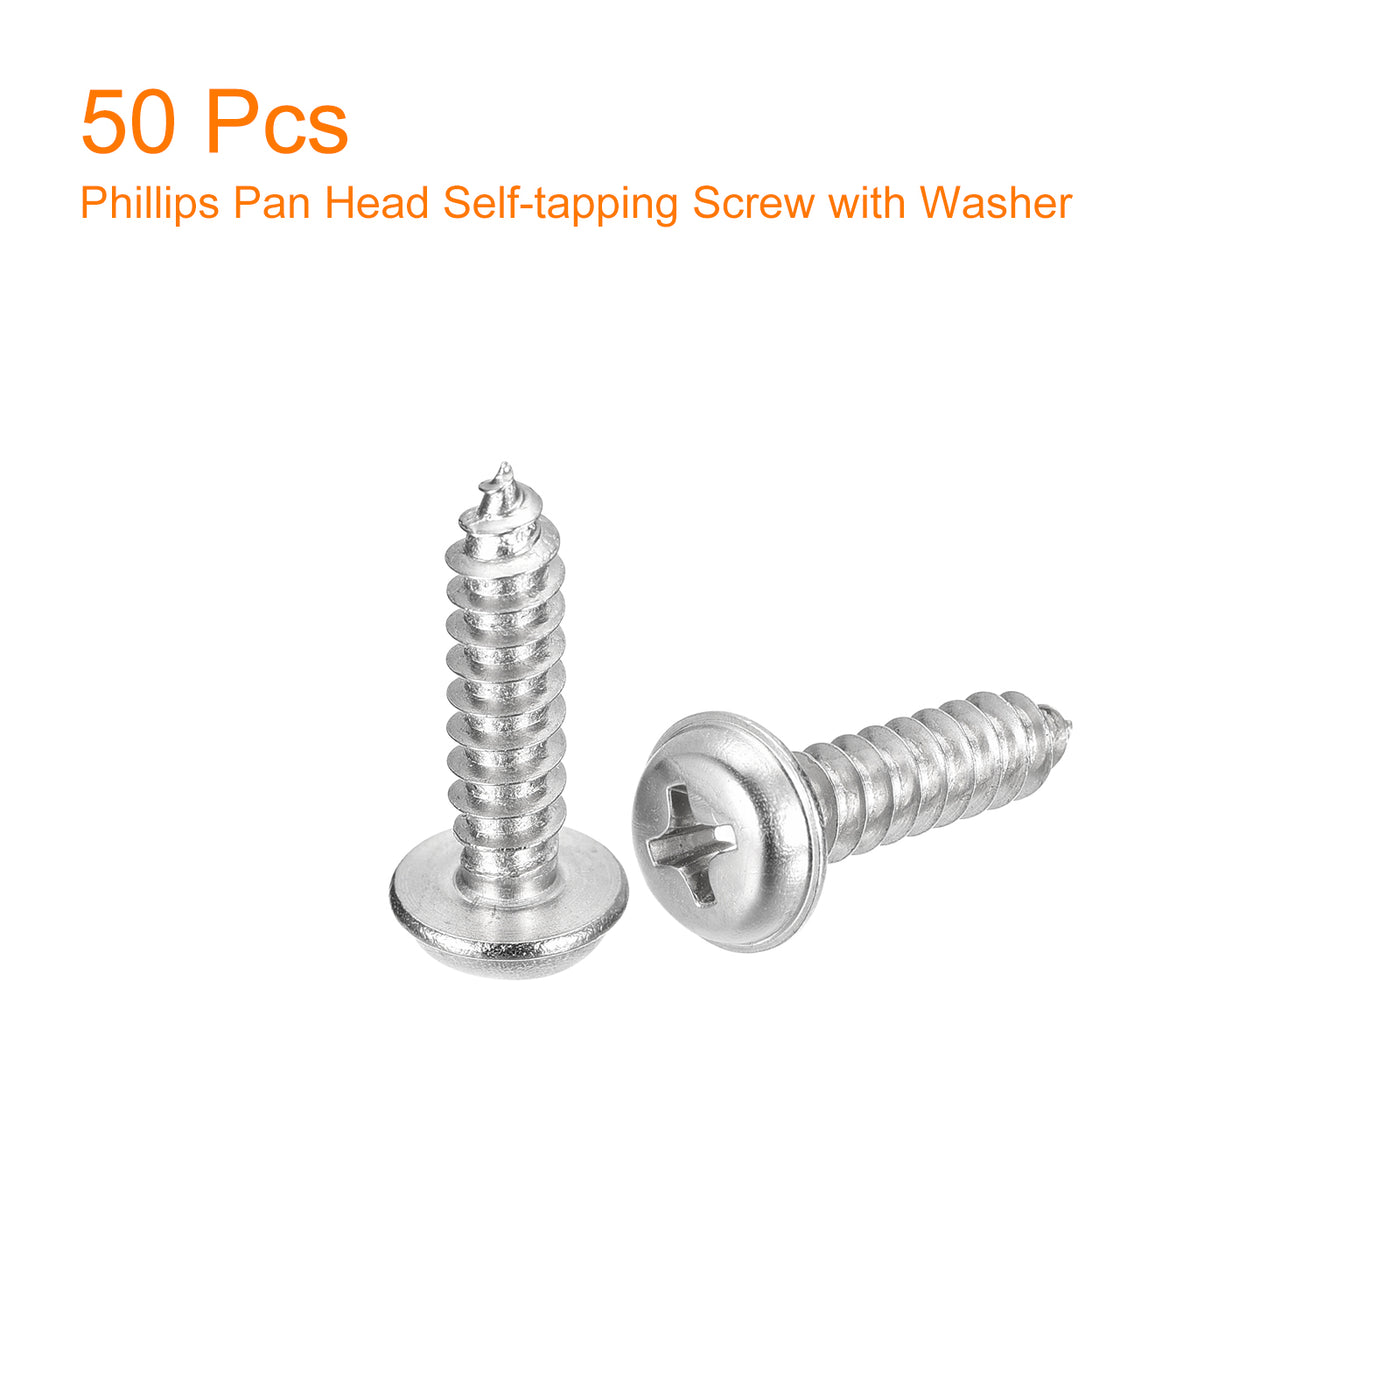 uxcell Uxcell ST5x20mm Phillips Pan Head Self-tapping Screw with Washer, 50pcs - 304 Stainless Steel Wood Screw Full Thread (Silver)